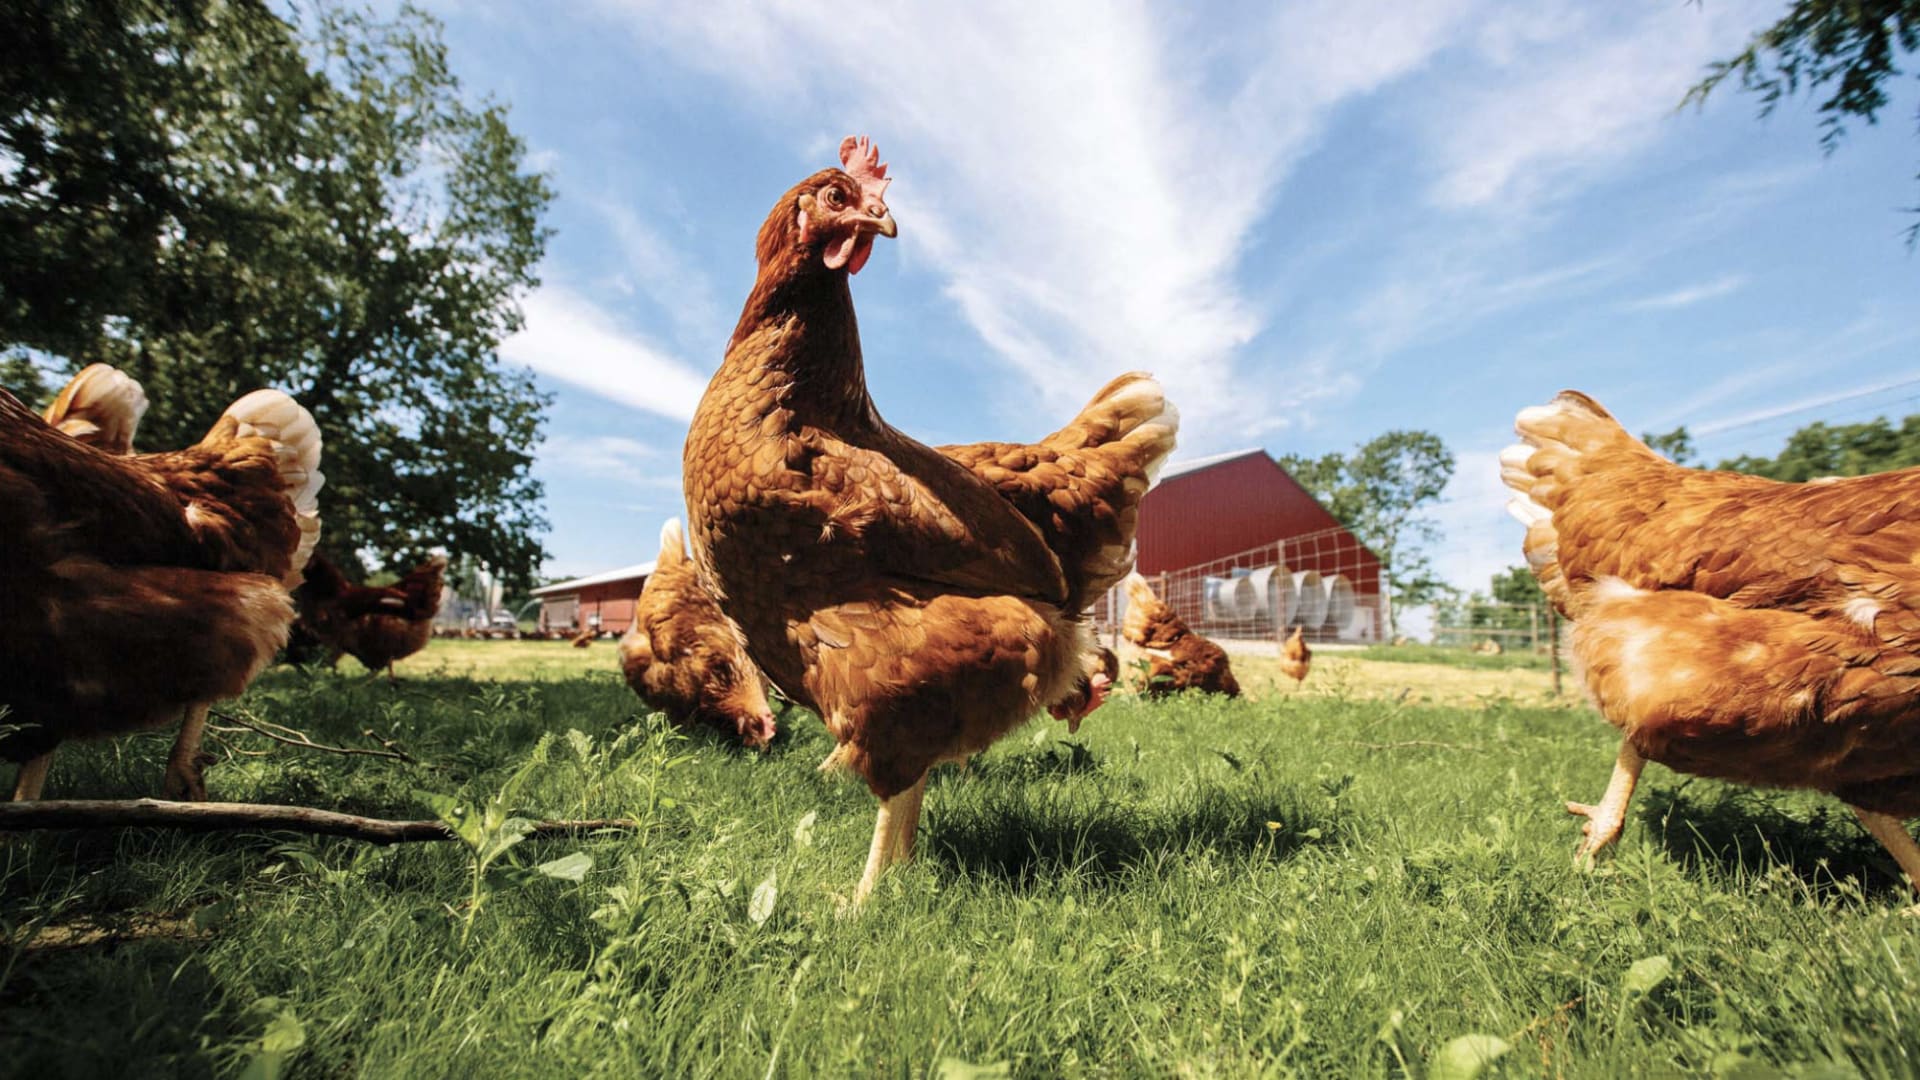 Though in stores nationwide, Vital Farms eggs are laid on farms in the pasture belt—southeastern states with mild climates, where the chickens can graze on grass year round